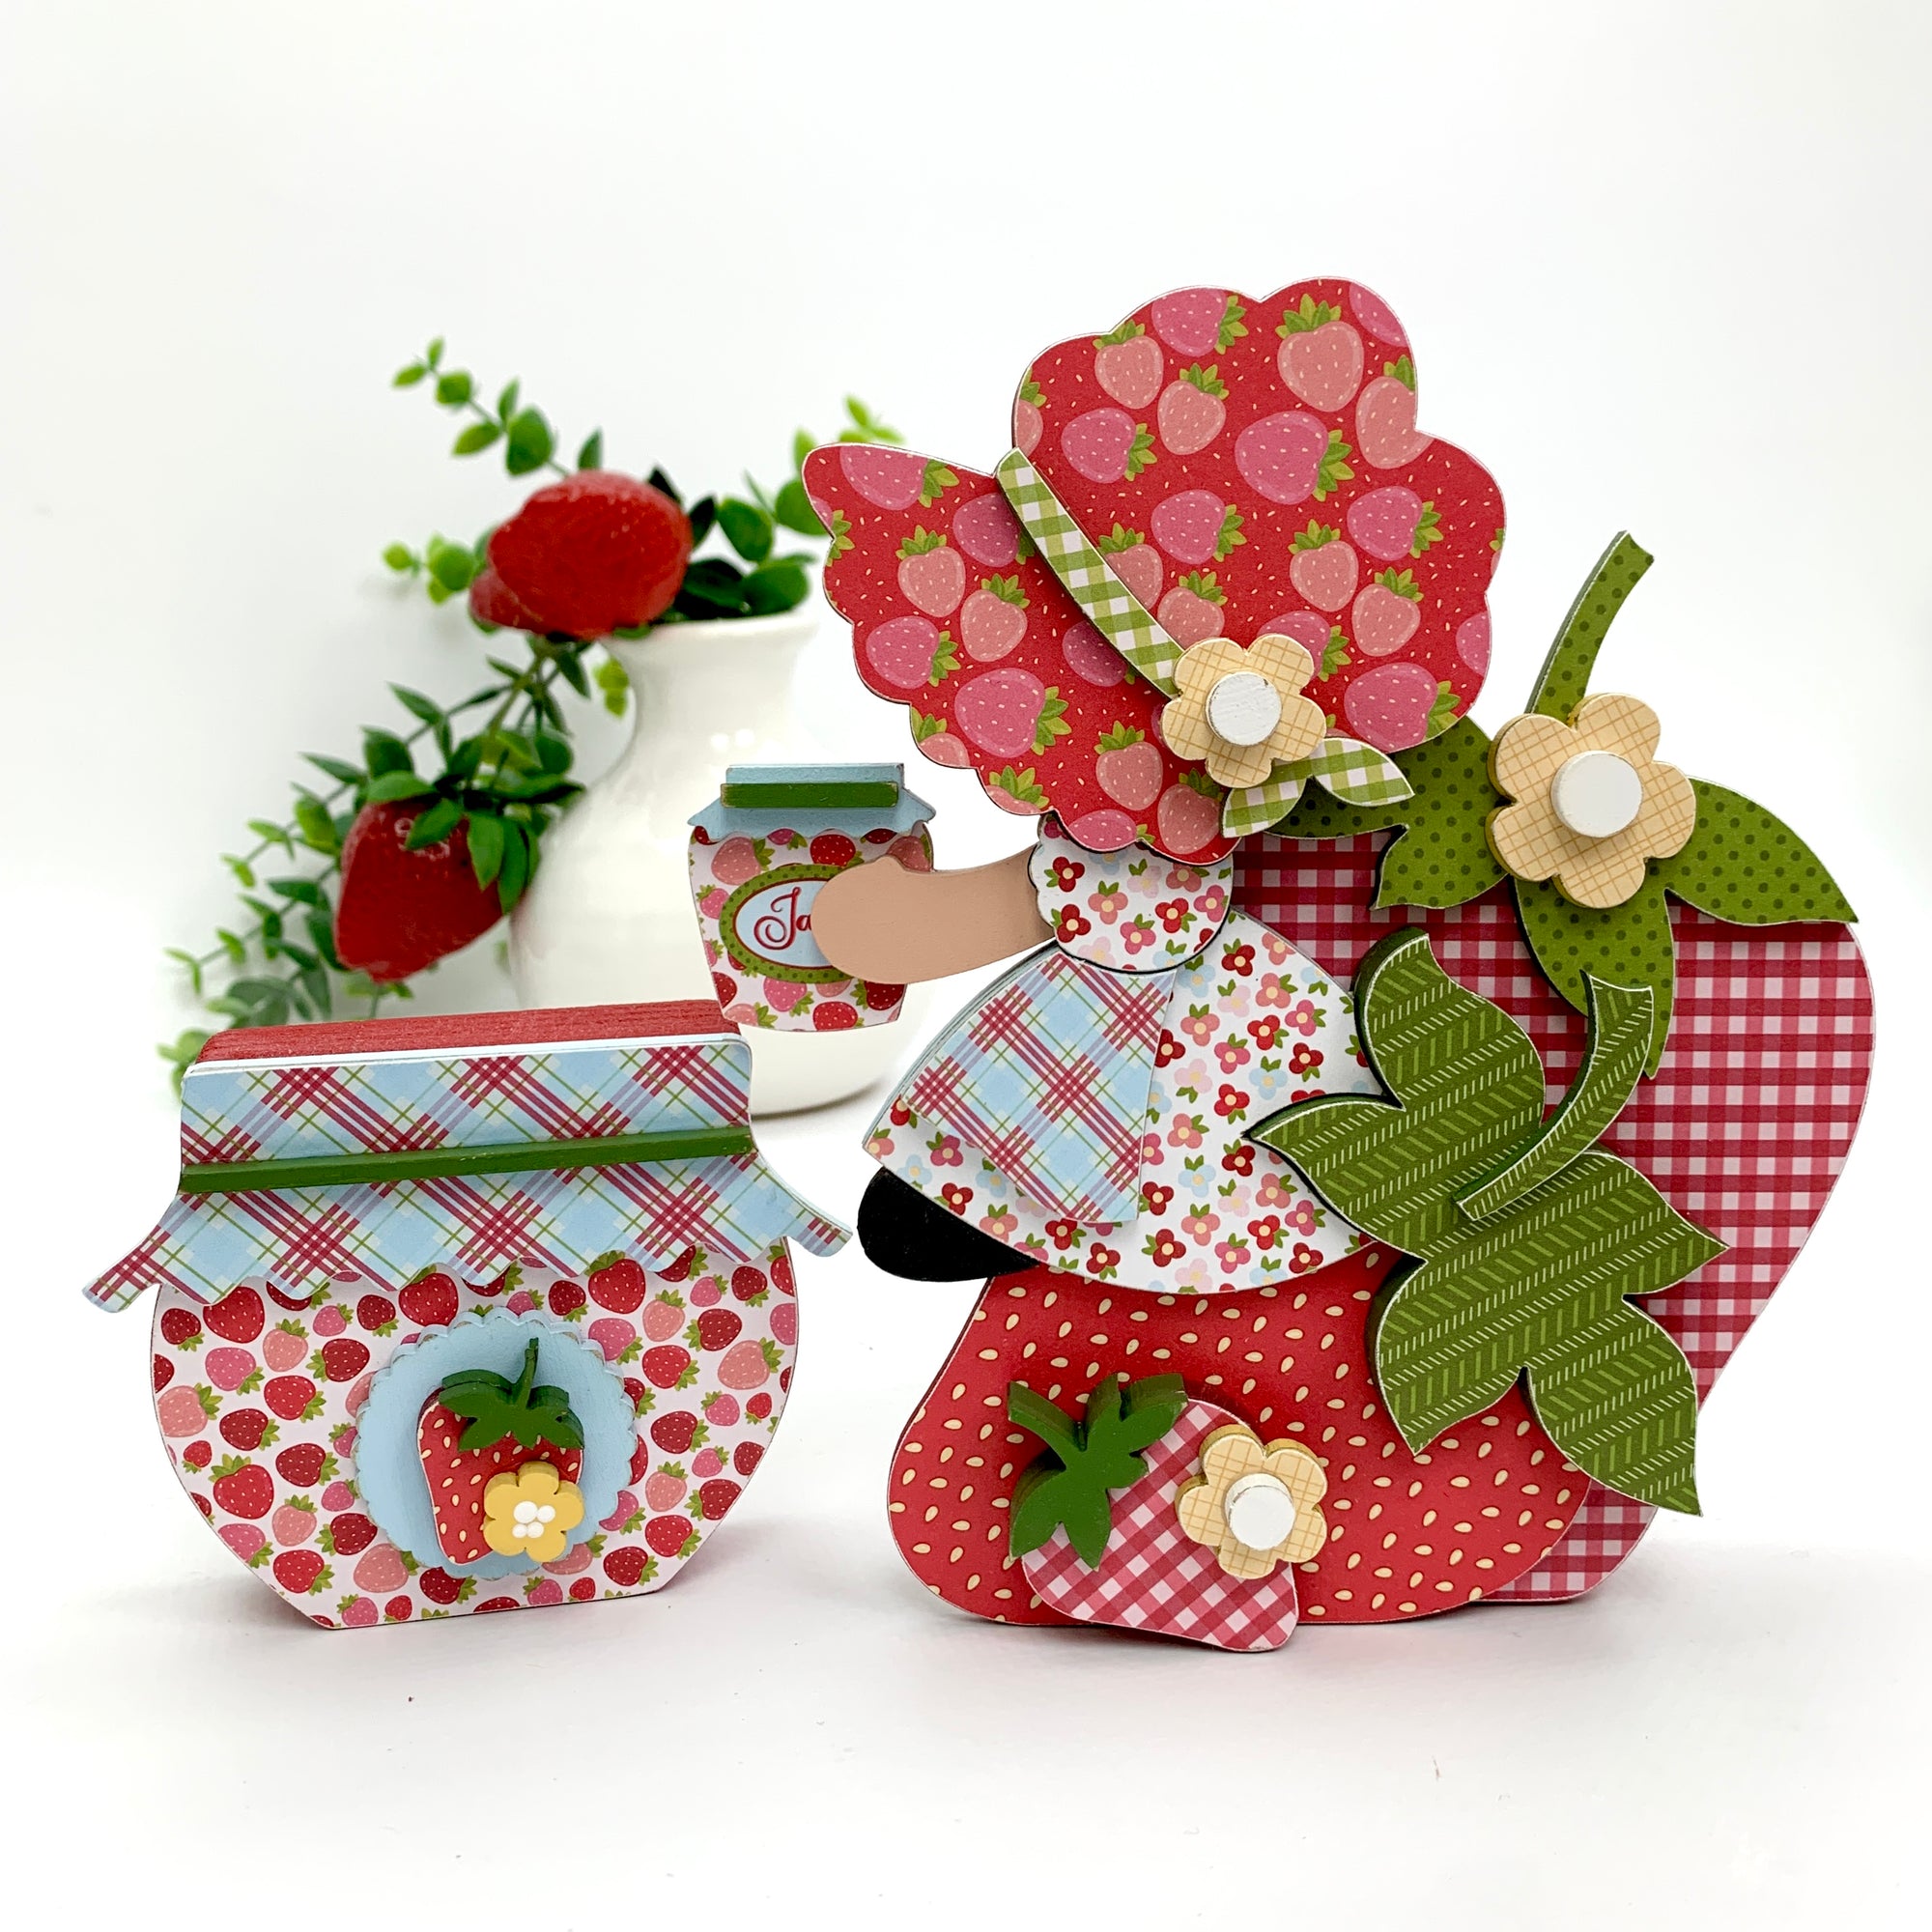 Strawberry girl sitting on strawberries and a jam jar wood decoration craft kit for tiered tray designing